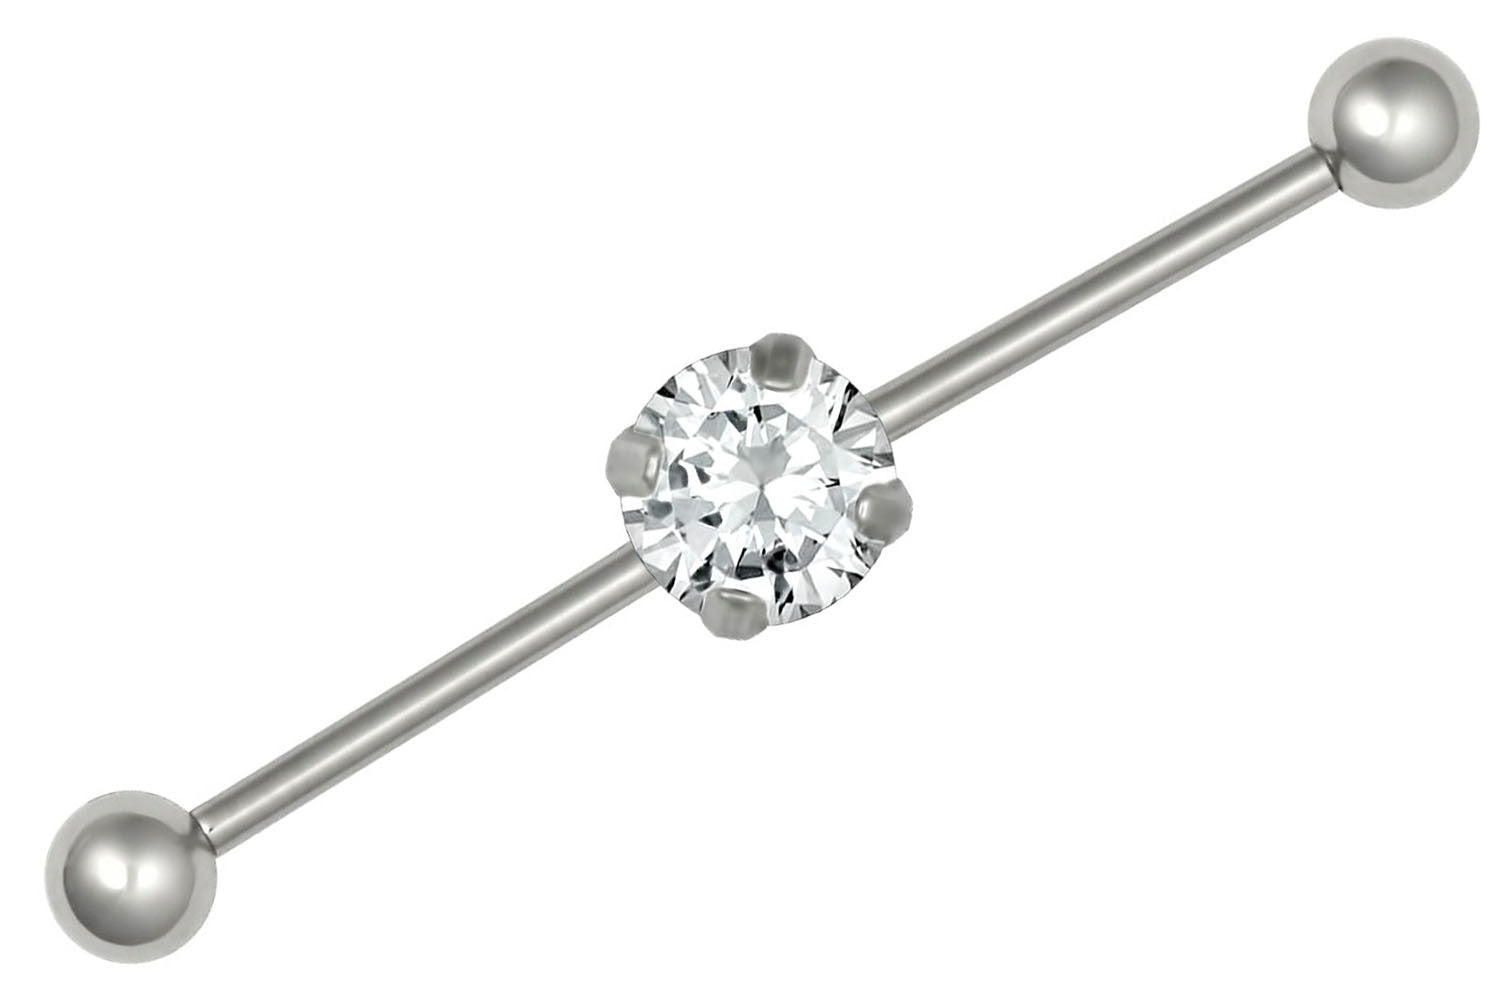 This 14 gauge industrial piercing barbell measures 1.5" and comes with 5 mm balls. This jewelry features a round Cubic Zirconia solitaire crystal (5 mm diameter). Both balls unscrew for easy use. This barbell is made with surgical grade 316L Stainless Steel. This body jewelry is hypoallergenic and nickel free.